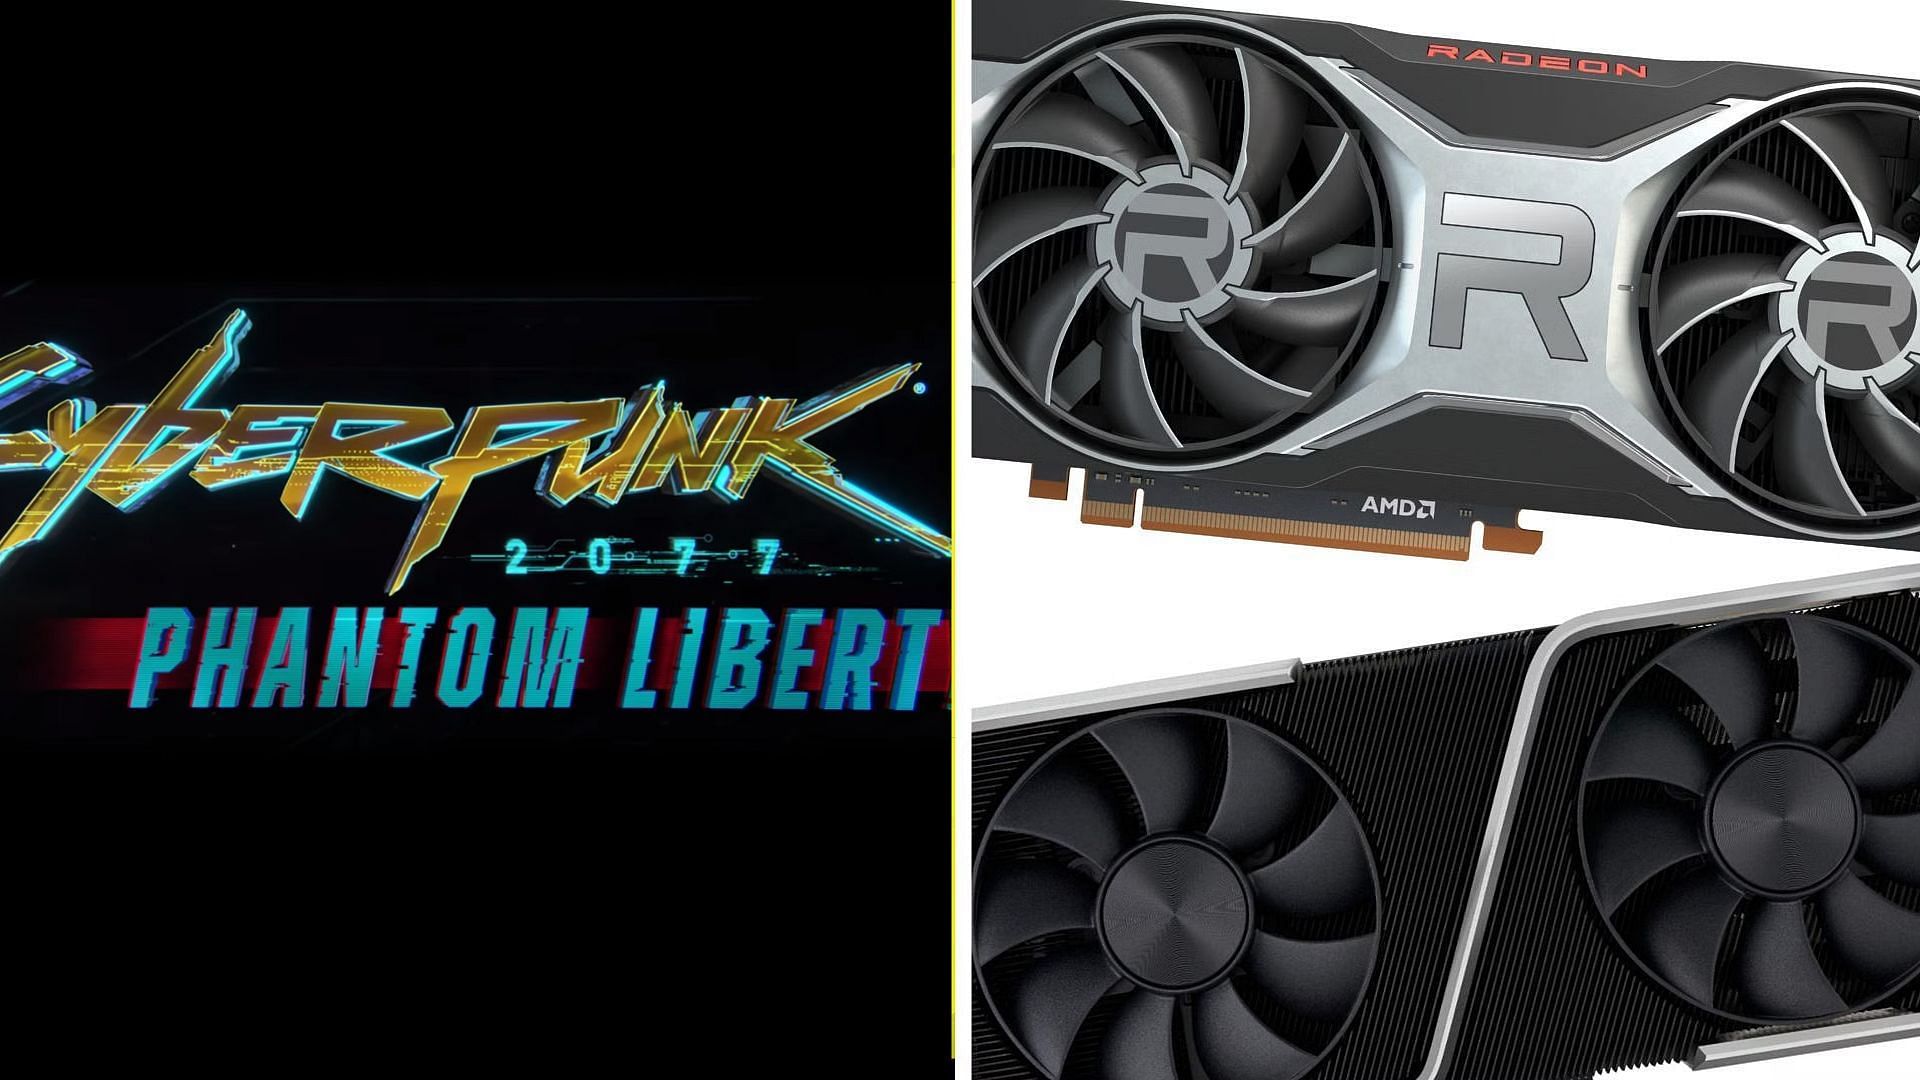 Cyberpunk 2077 Phantom Liberty requires some high-end graphics cards (Image via Nvidia, AMD, and CD Projekt Red)